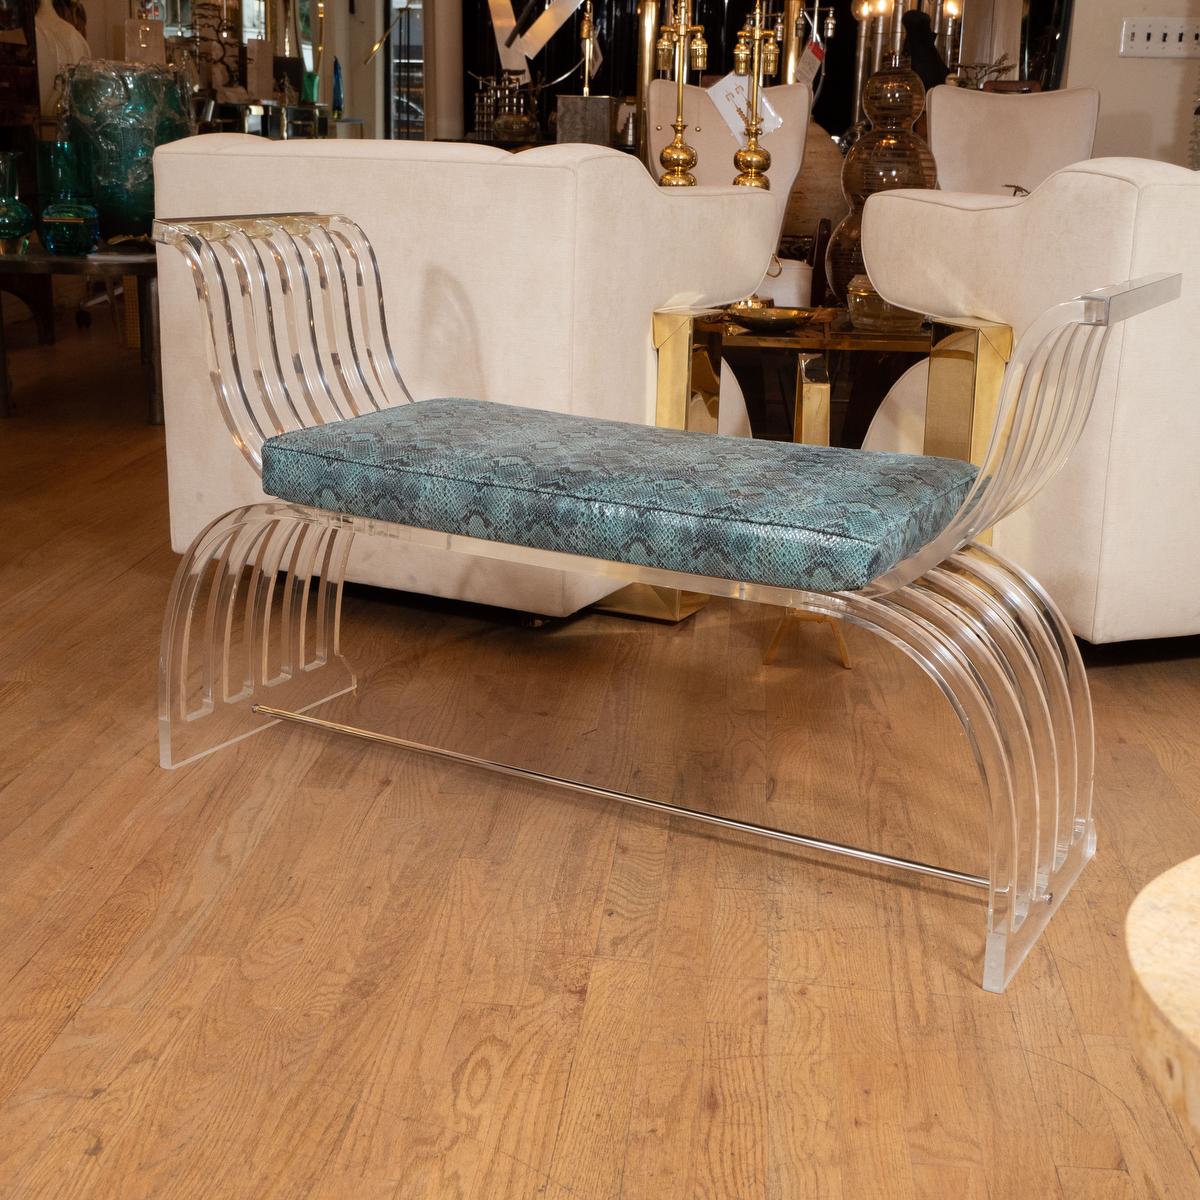 Curvilinear lucite and chrome bench attributed to Karl Springer. Upholstered in snakeskin print. 